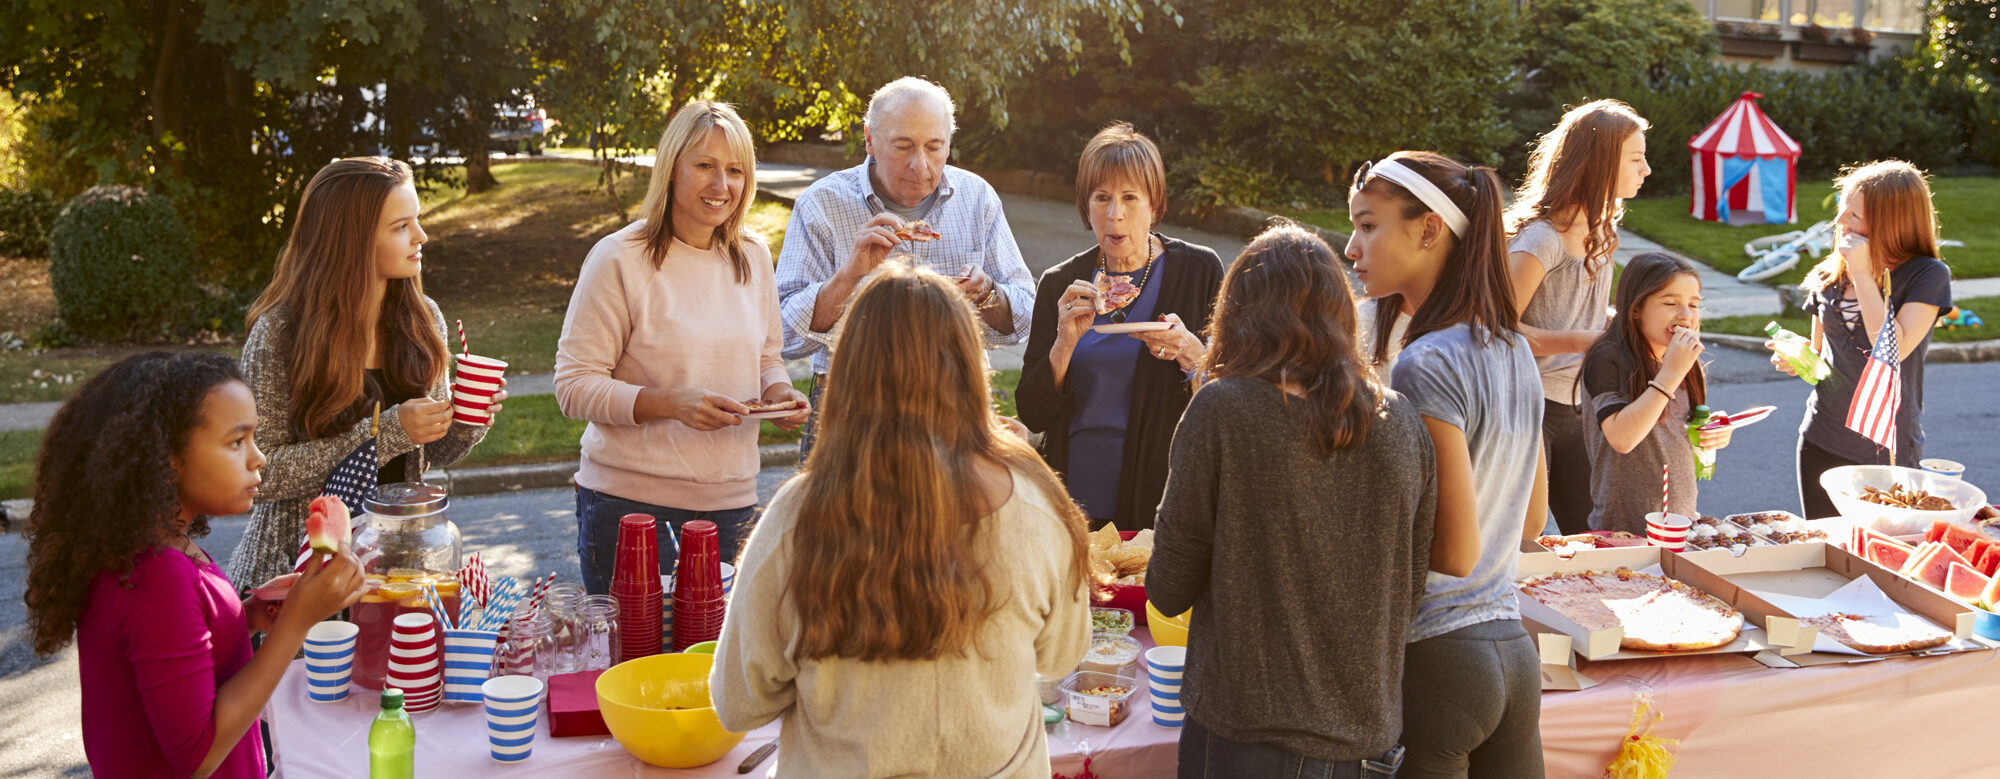 an outdoor celebration with a table and food in the street with a diverse group of neighbors of all ages